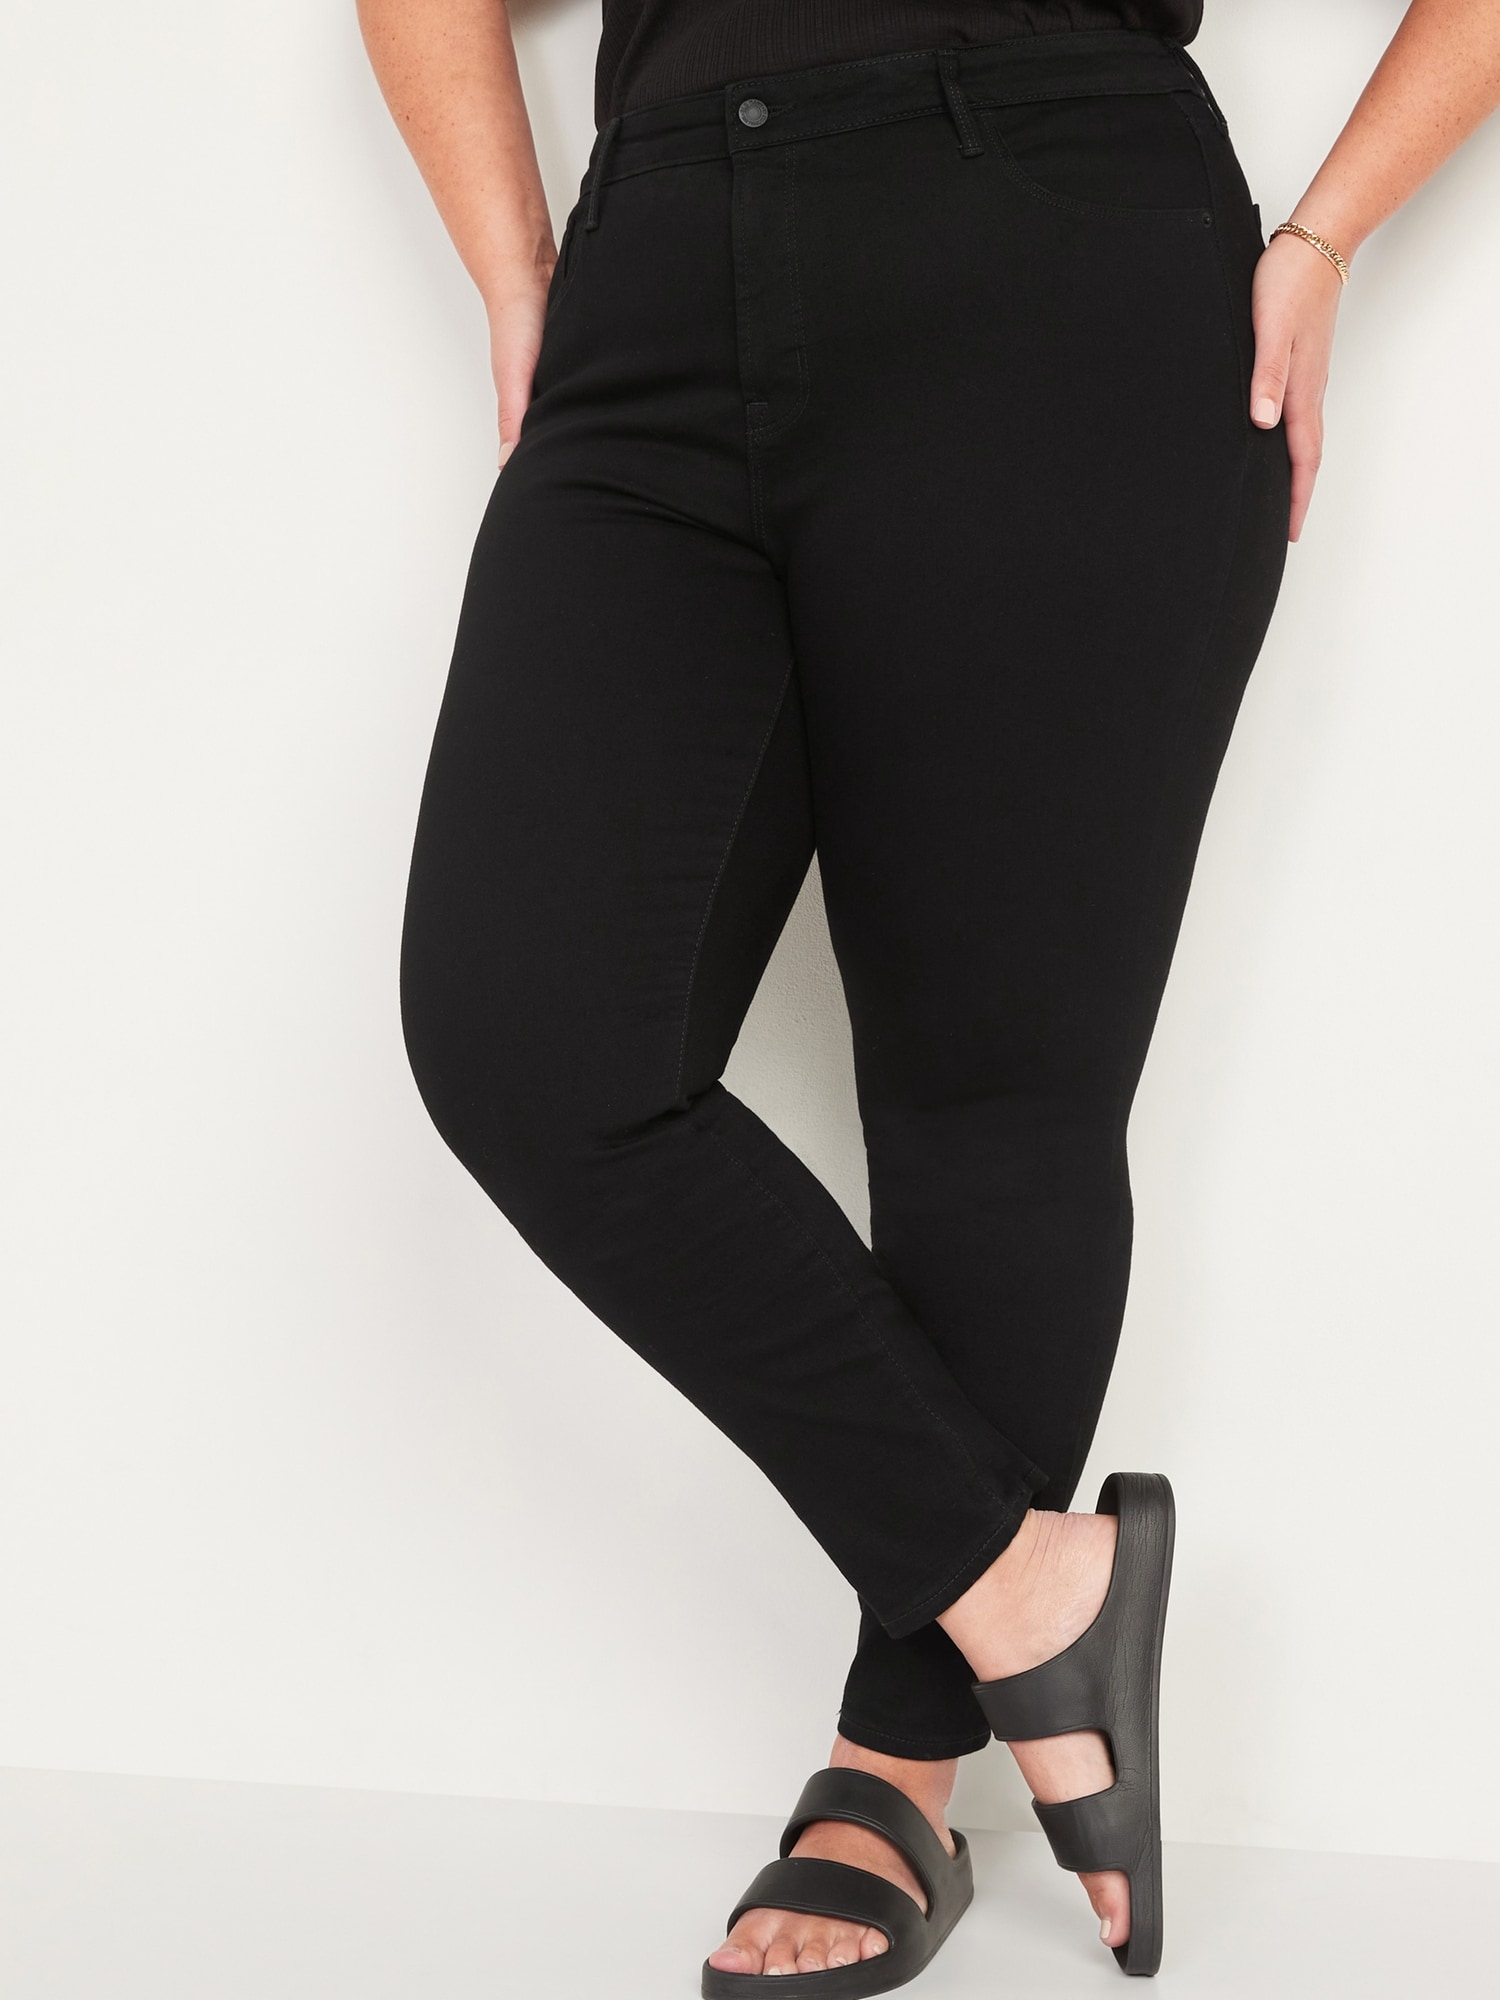 High-Waisted Pop Icon Black Skinny Jeans for Women | Old Navy